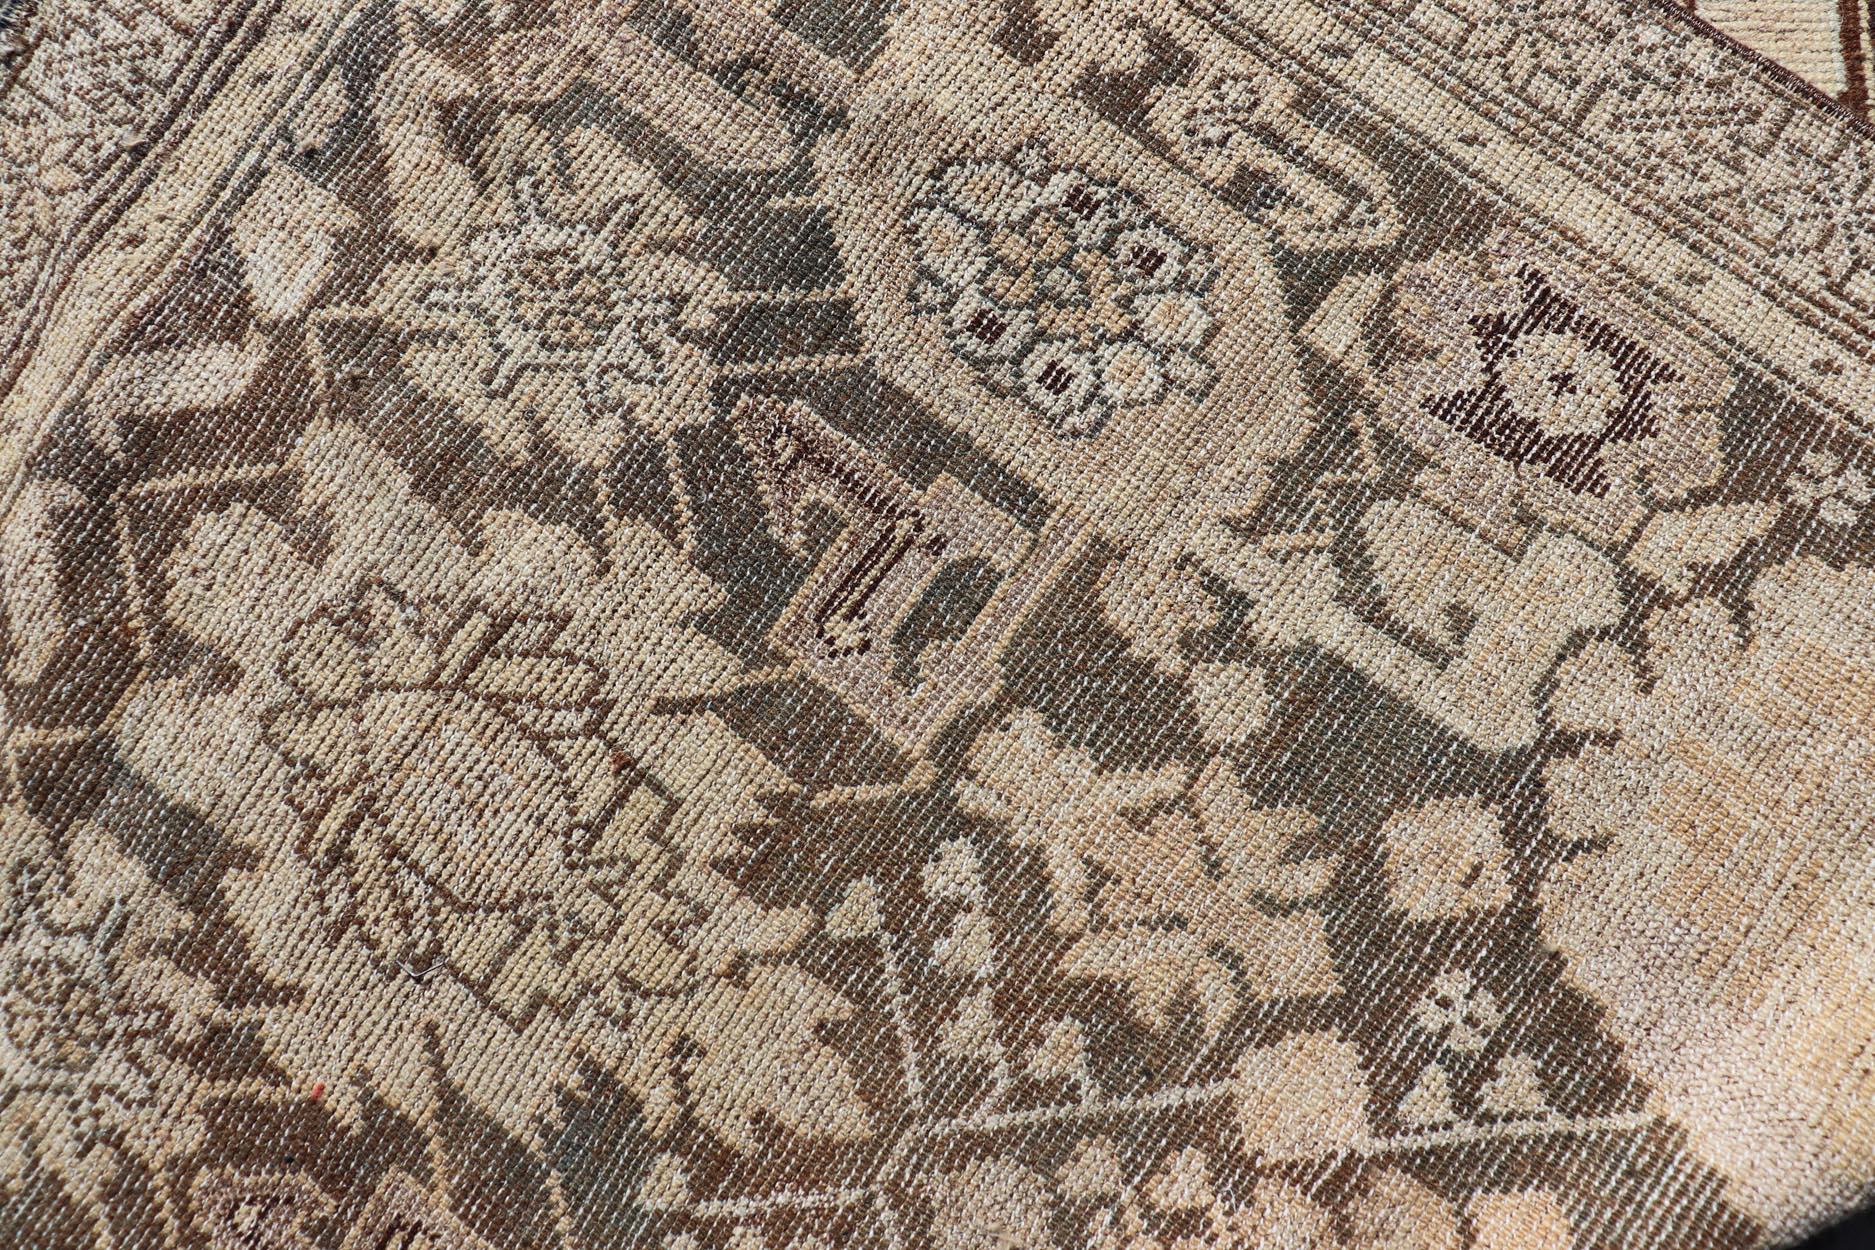 Antique Karabagh Runner with All-Over Floral Medallion Design in Brown and Tan For Sale 4